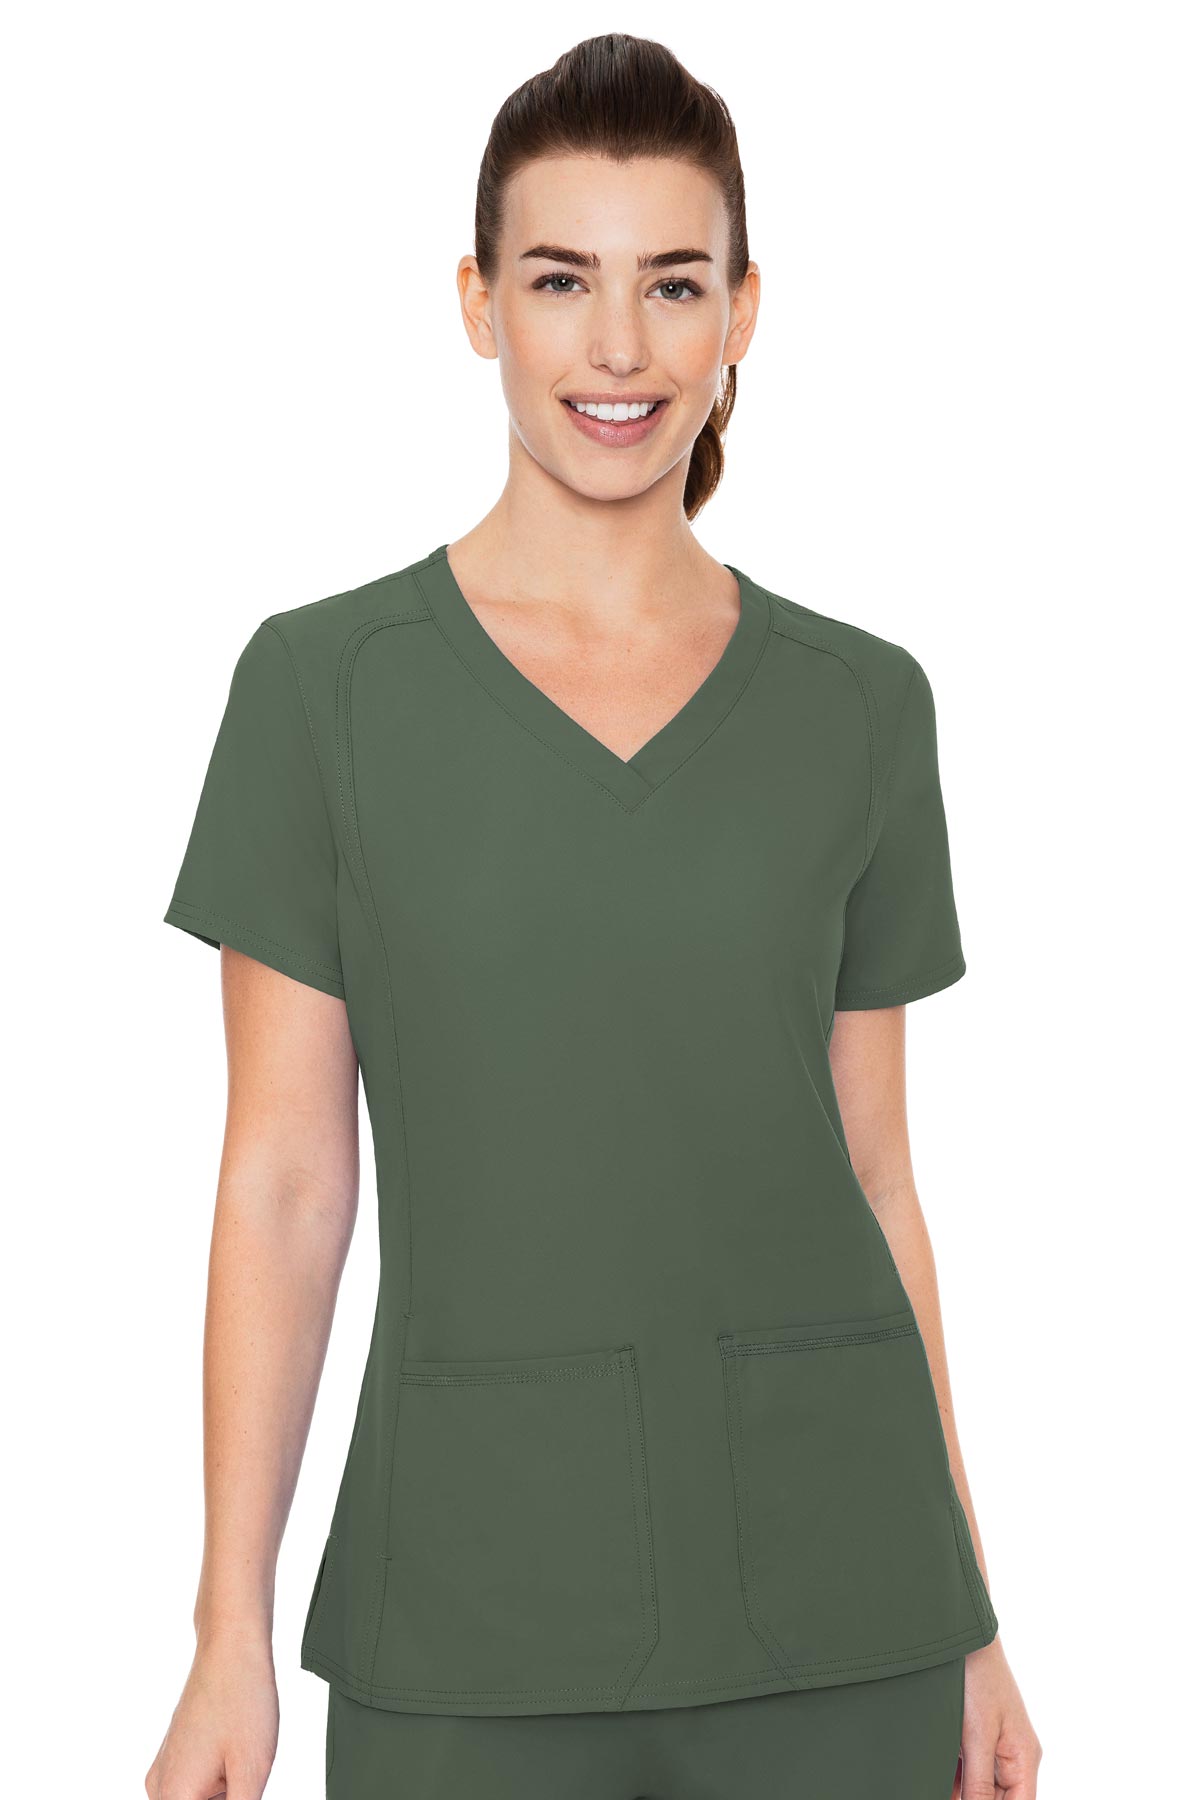 Med Couture Scrub Top Insight Classic V-Neck Side Pocket in Olive at Parker's Clothing and Shoes.